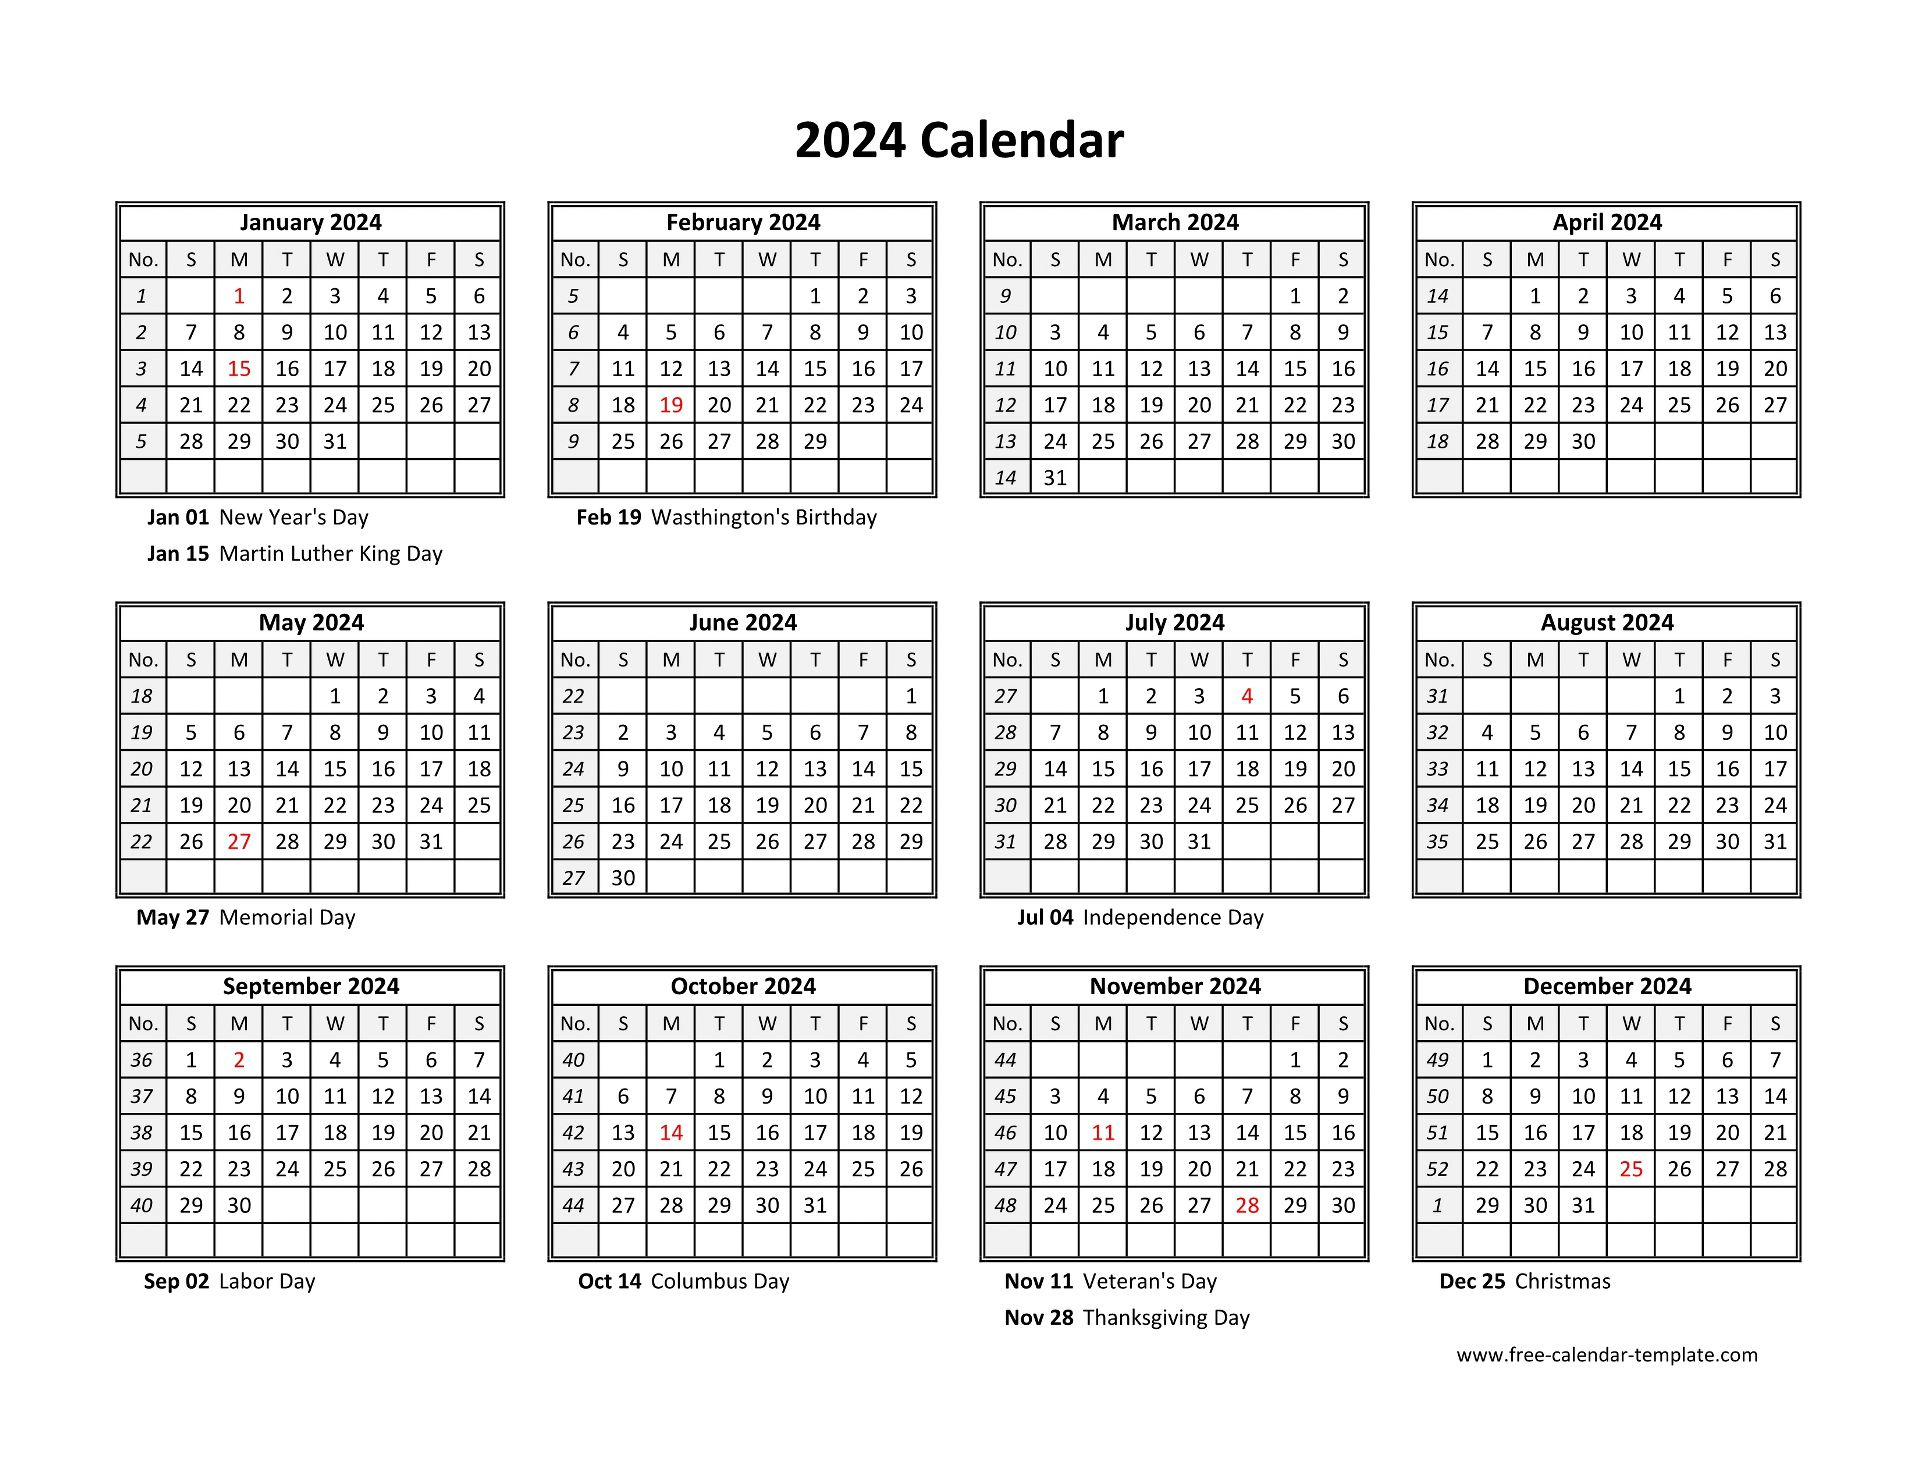 Printable Yearly Calendar 2024 | Free-Calendar-Template | Printable 2024 Calendar One Page With Holidays